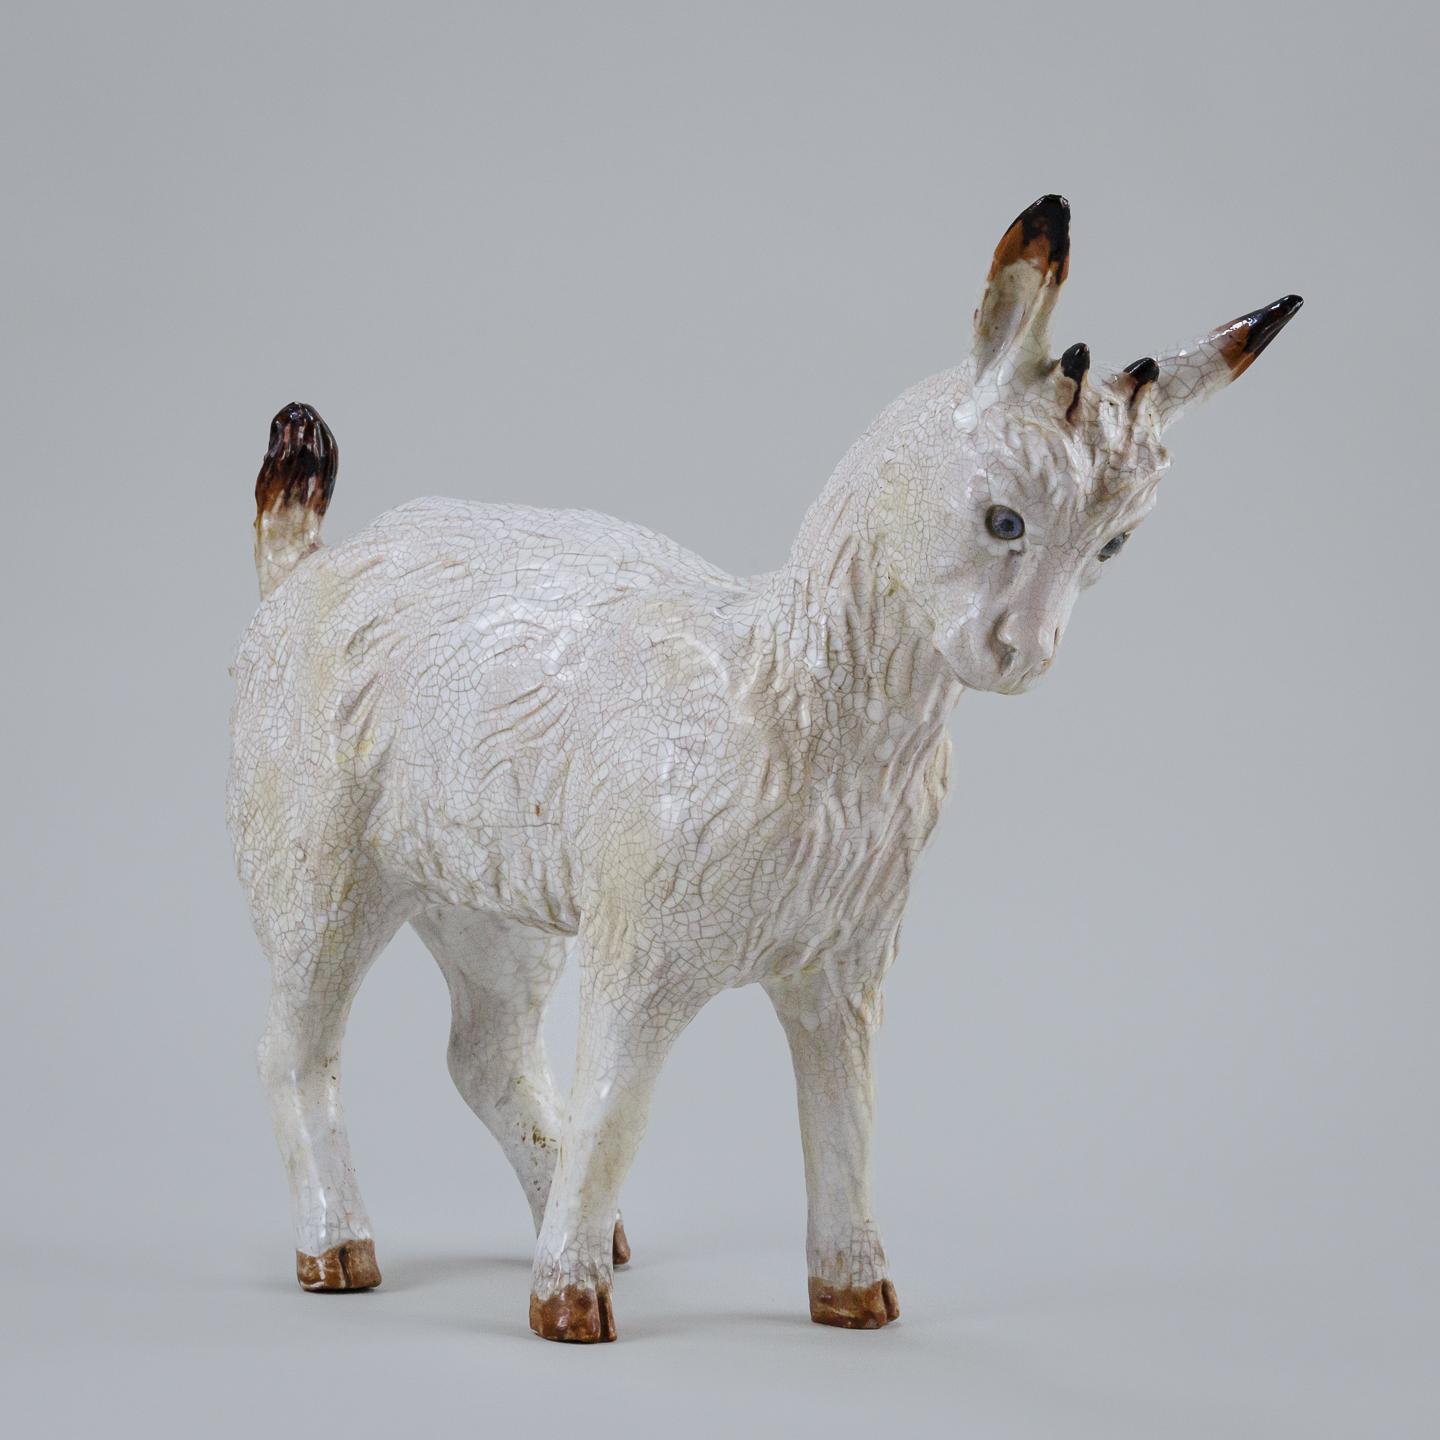 Impressive and amusing lifesized Pygmy goat, made by Tuilerie du Mesnil de Bavent commonly referred to just as Bavent. Wonderful used condition with expected craquelure to the glaze and minor nibbles. Glass eyes. France Circa 1920 Tuilerie du Mesnil